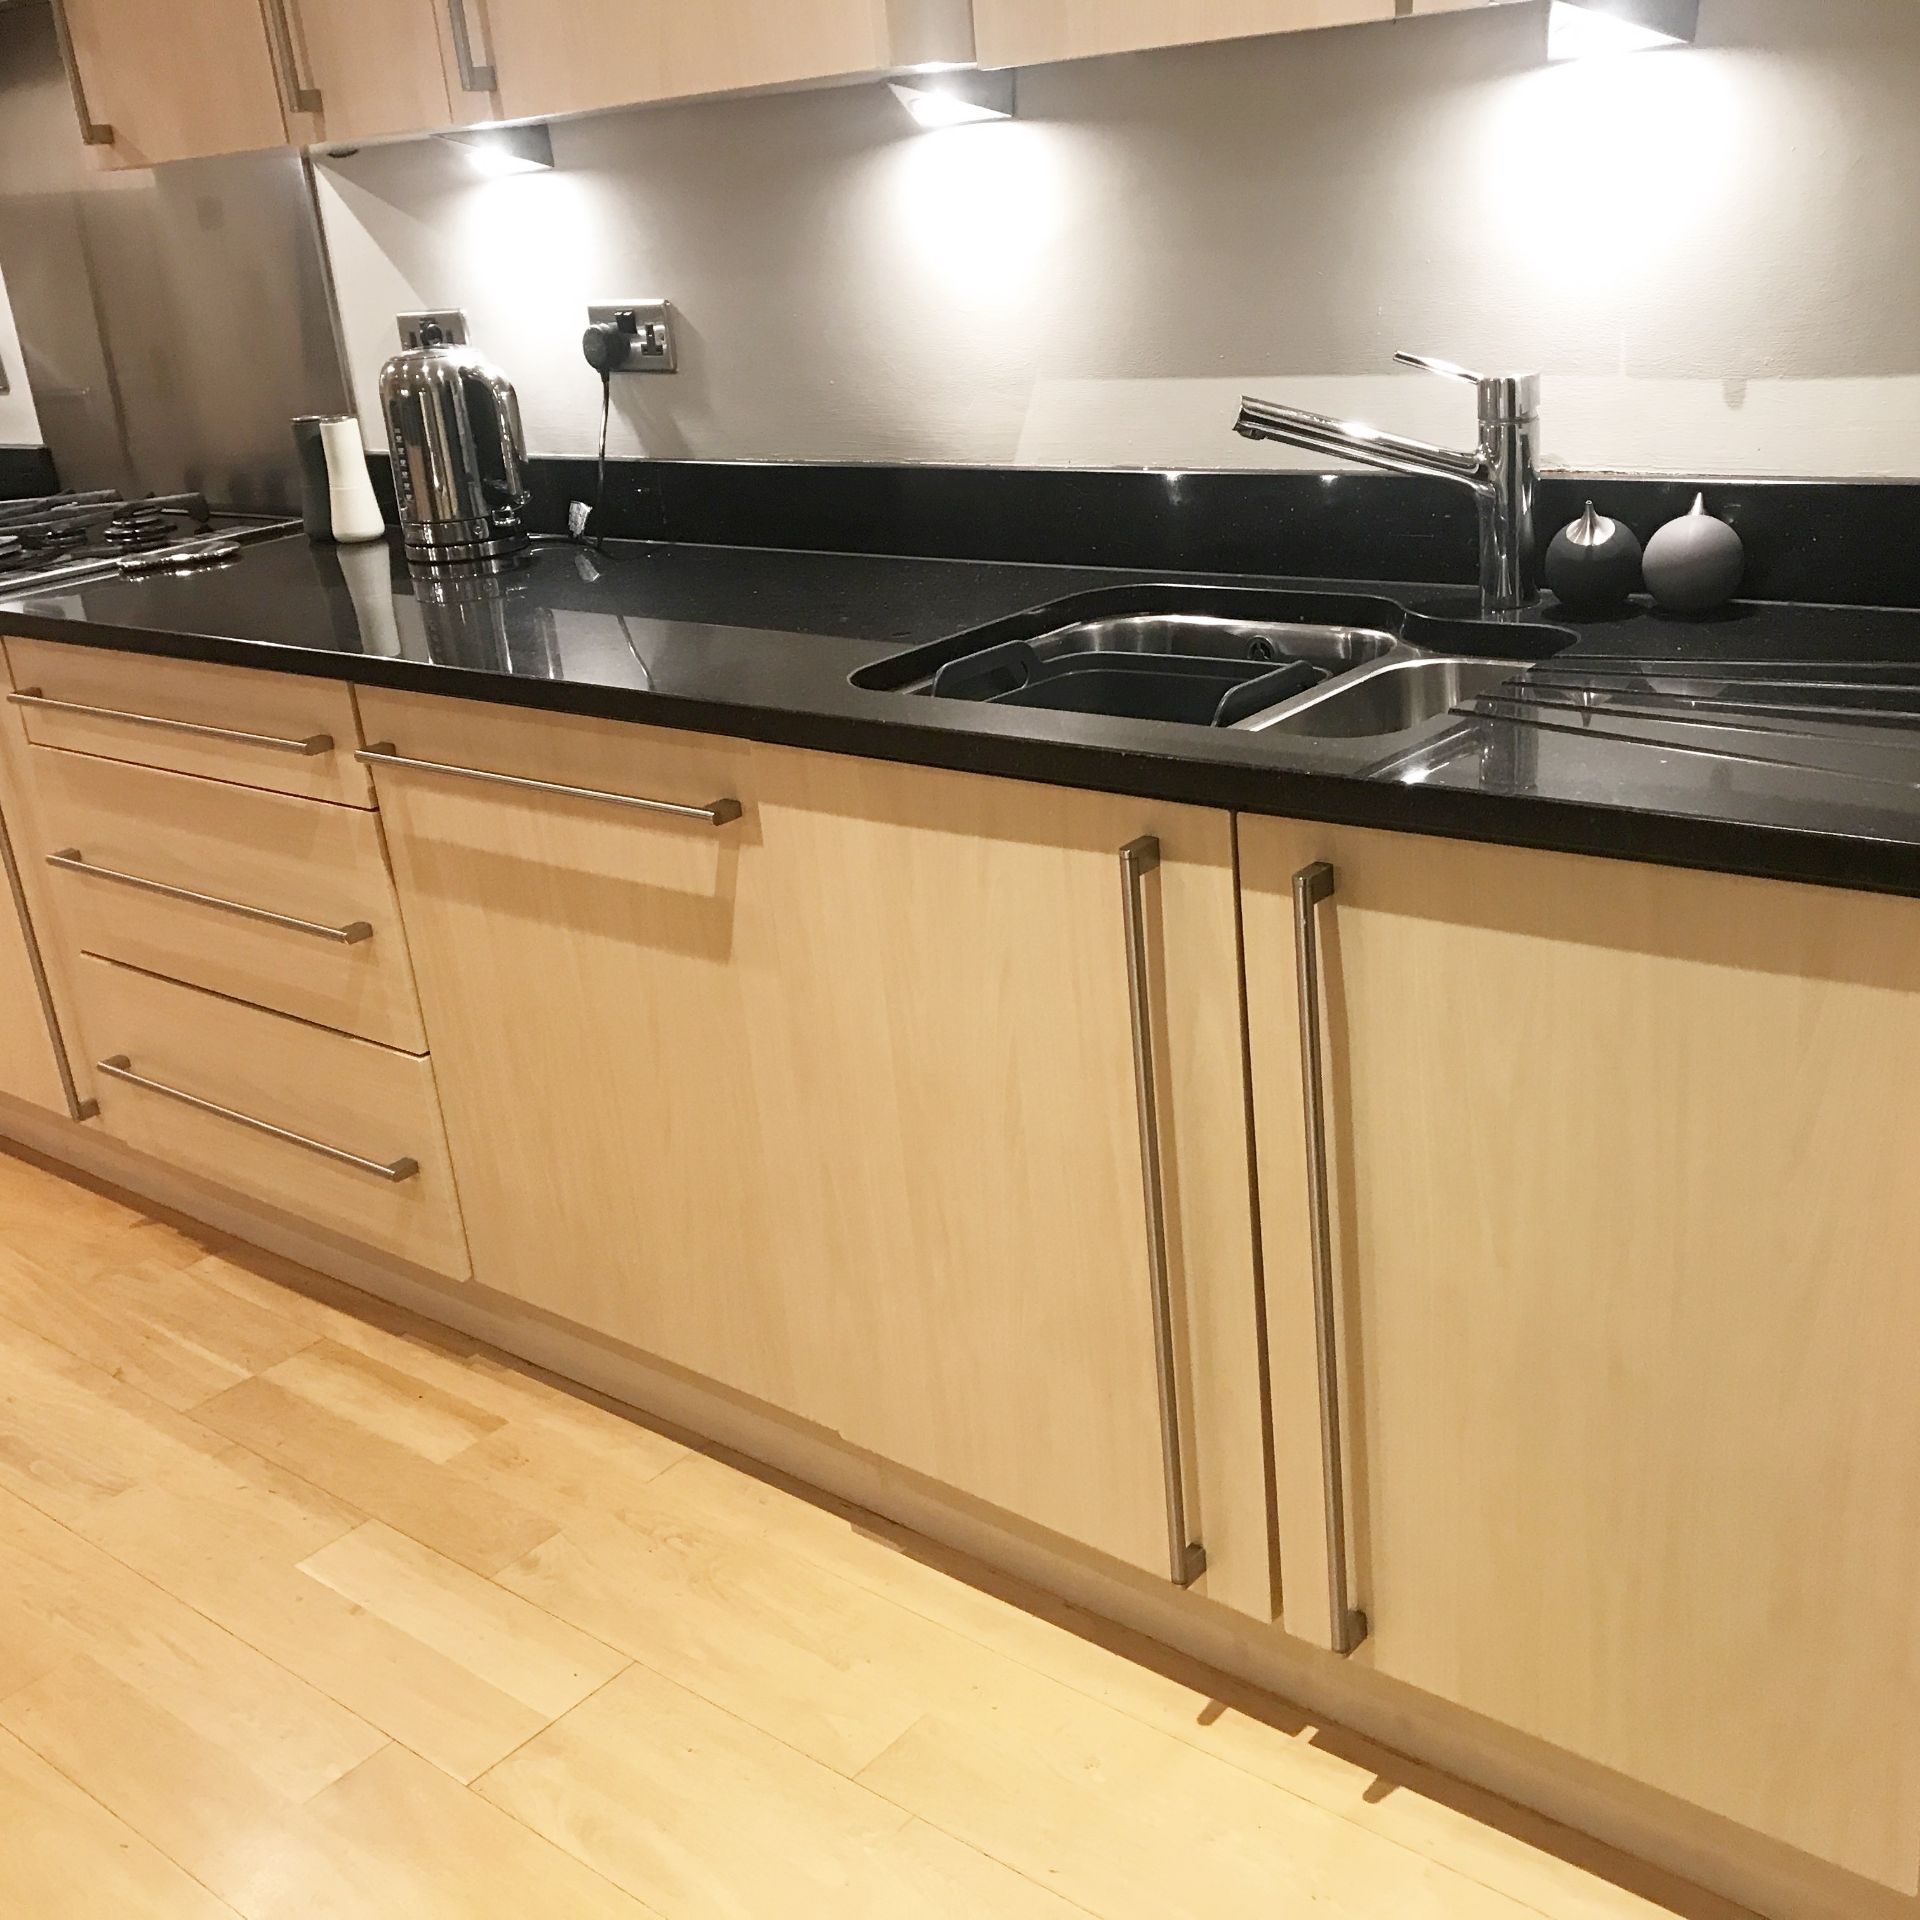 1 x Fitted Kitchen Featuring Birch Soft Close Doors, Black Granite Worktops and Zanussi Appliances - - Image 17 of 51